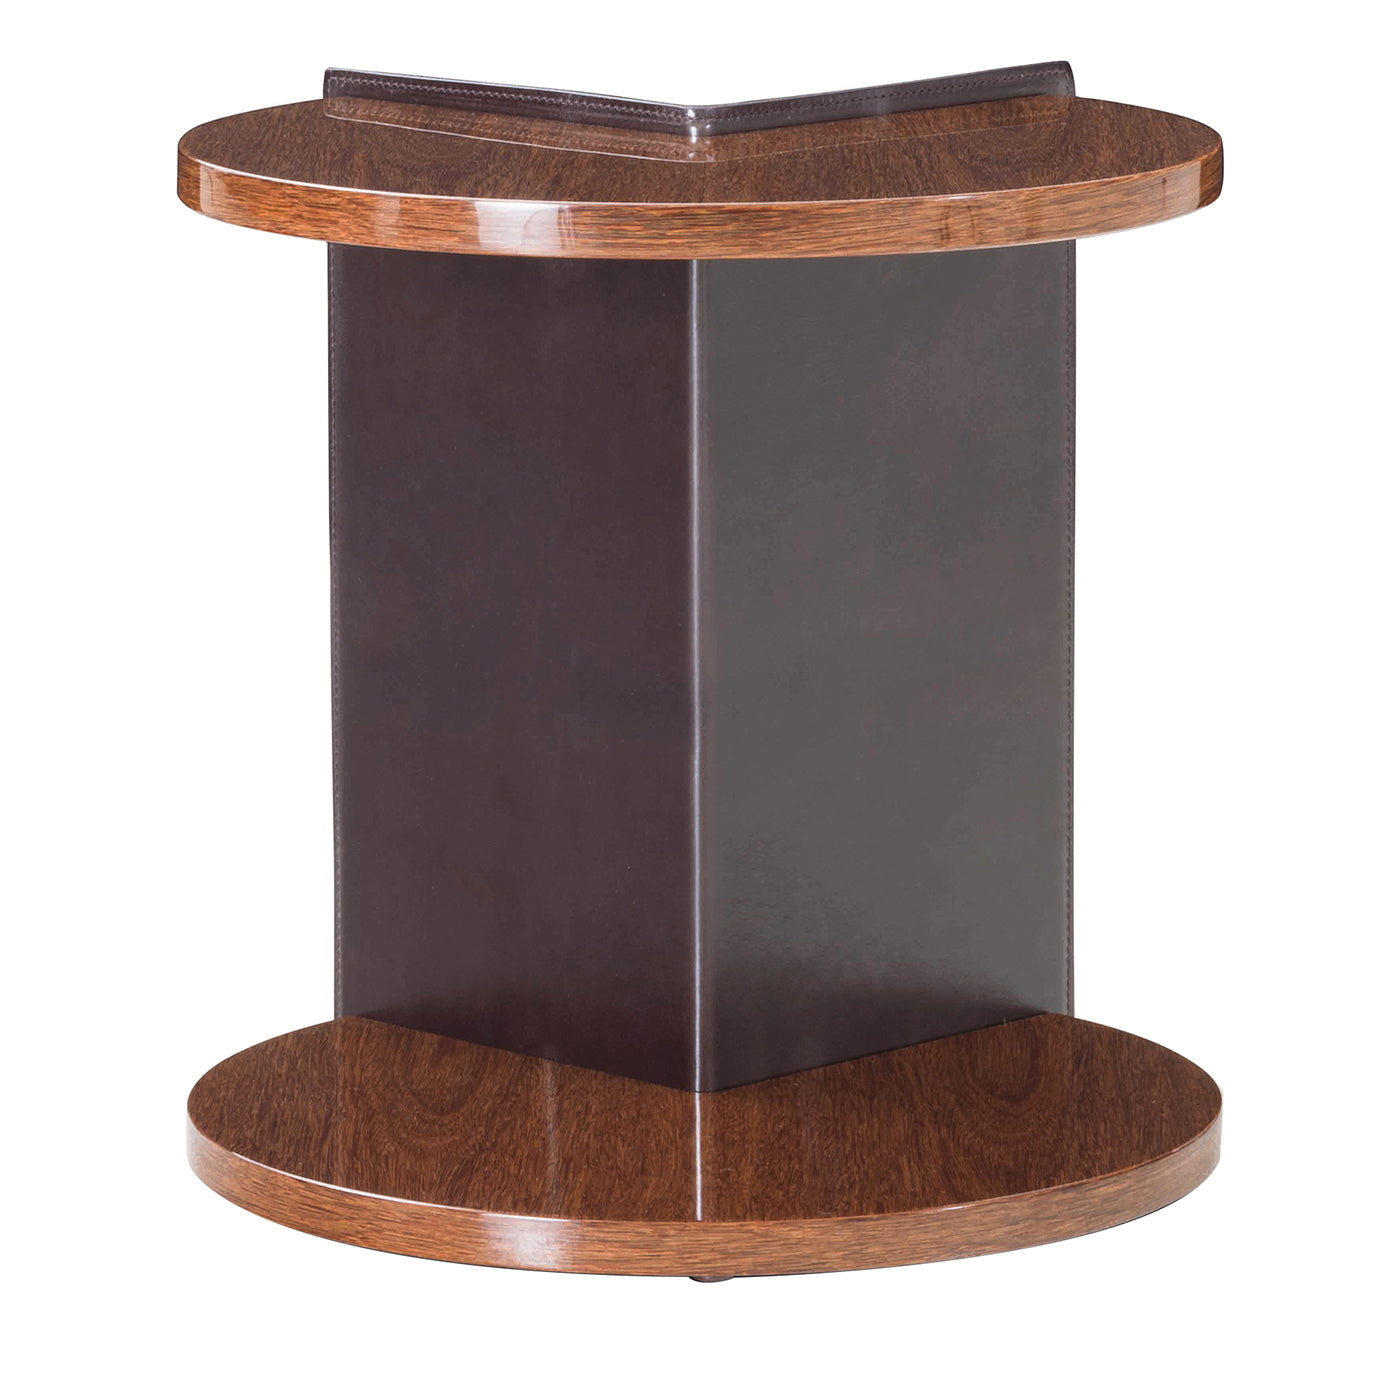 Tallo side table - Main view